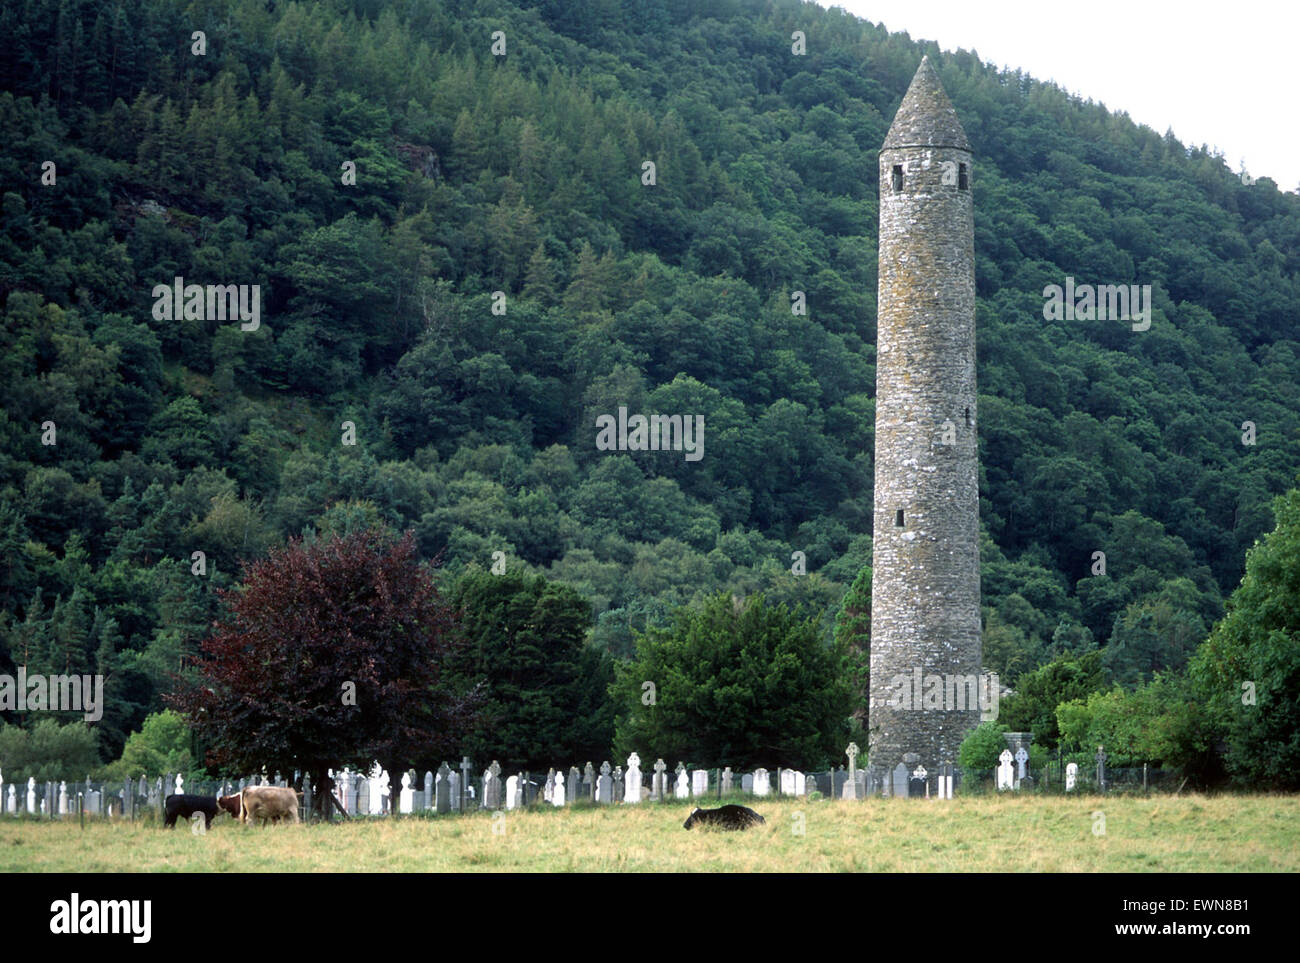 A MONASTIC ROUND TOWER AT GLENDALOUGH CO WICKLOW IRELAND Stock Photo